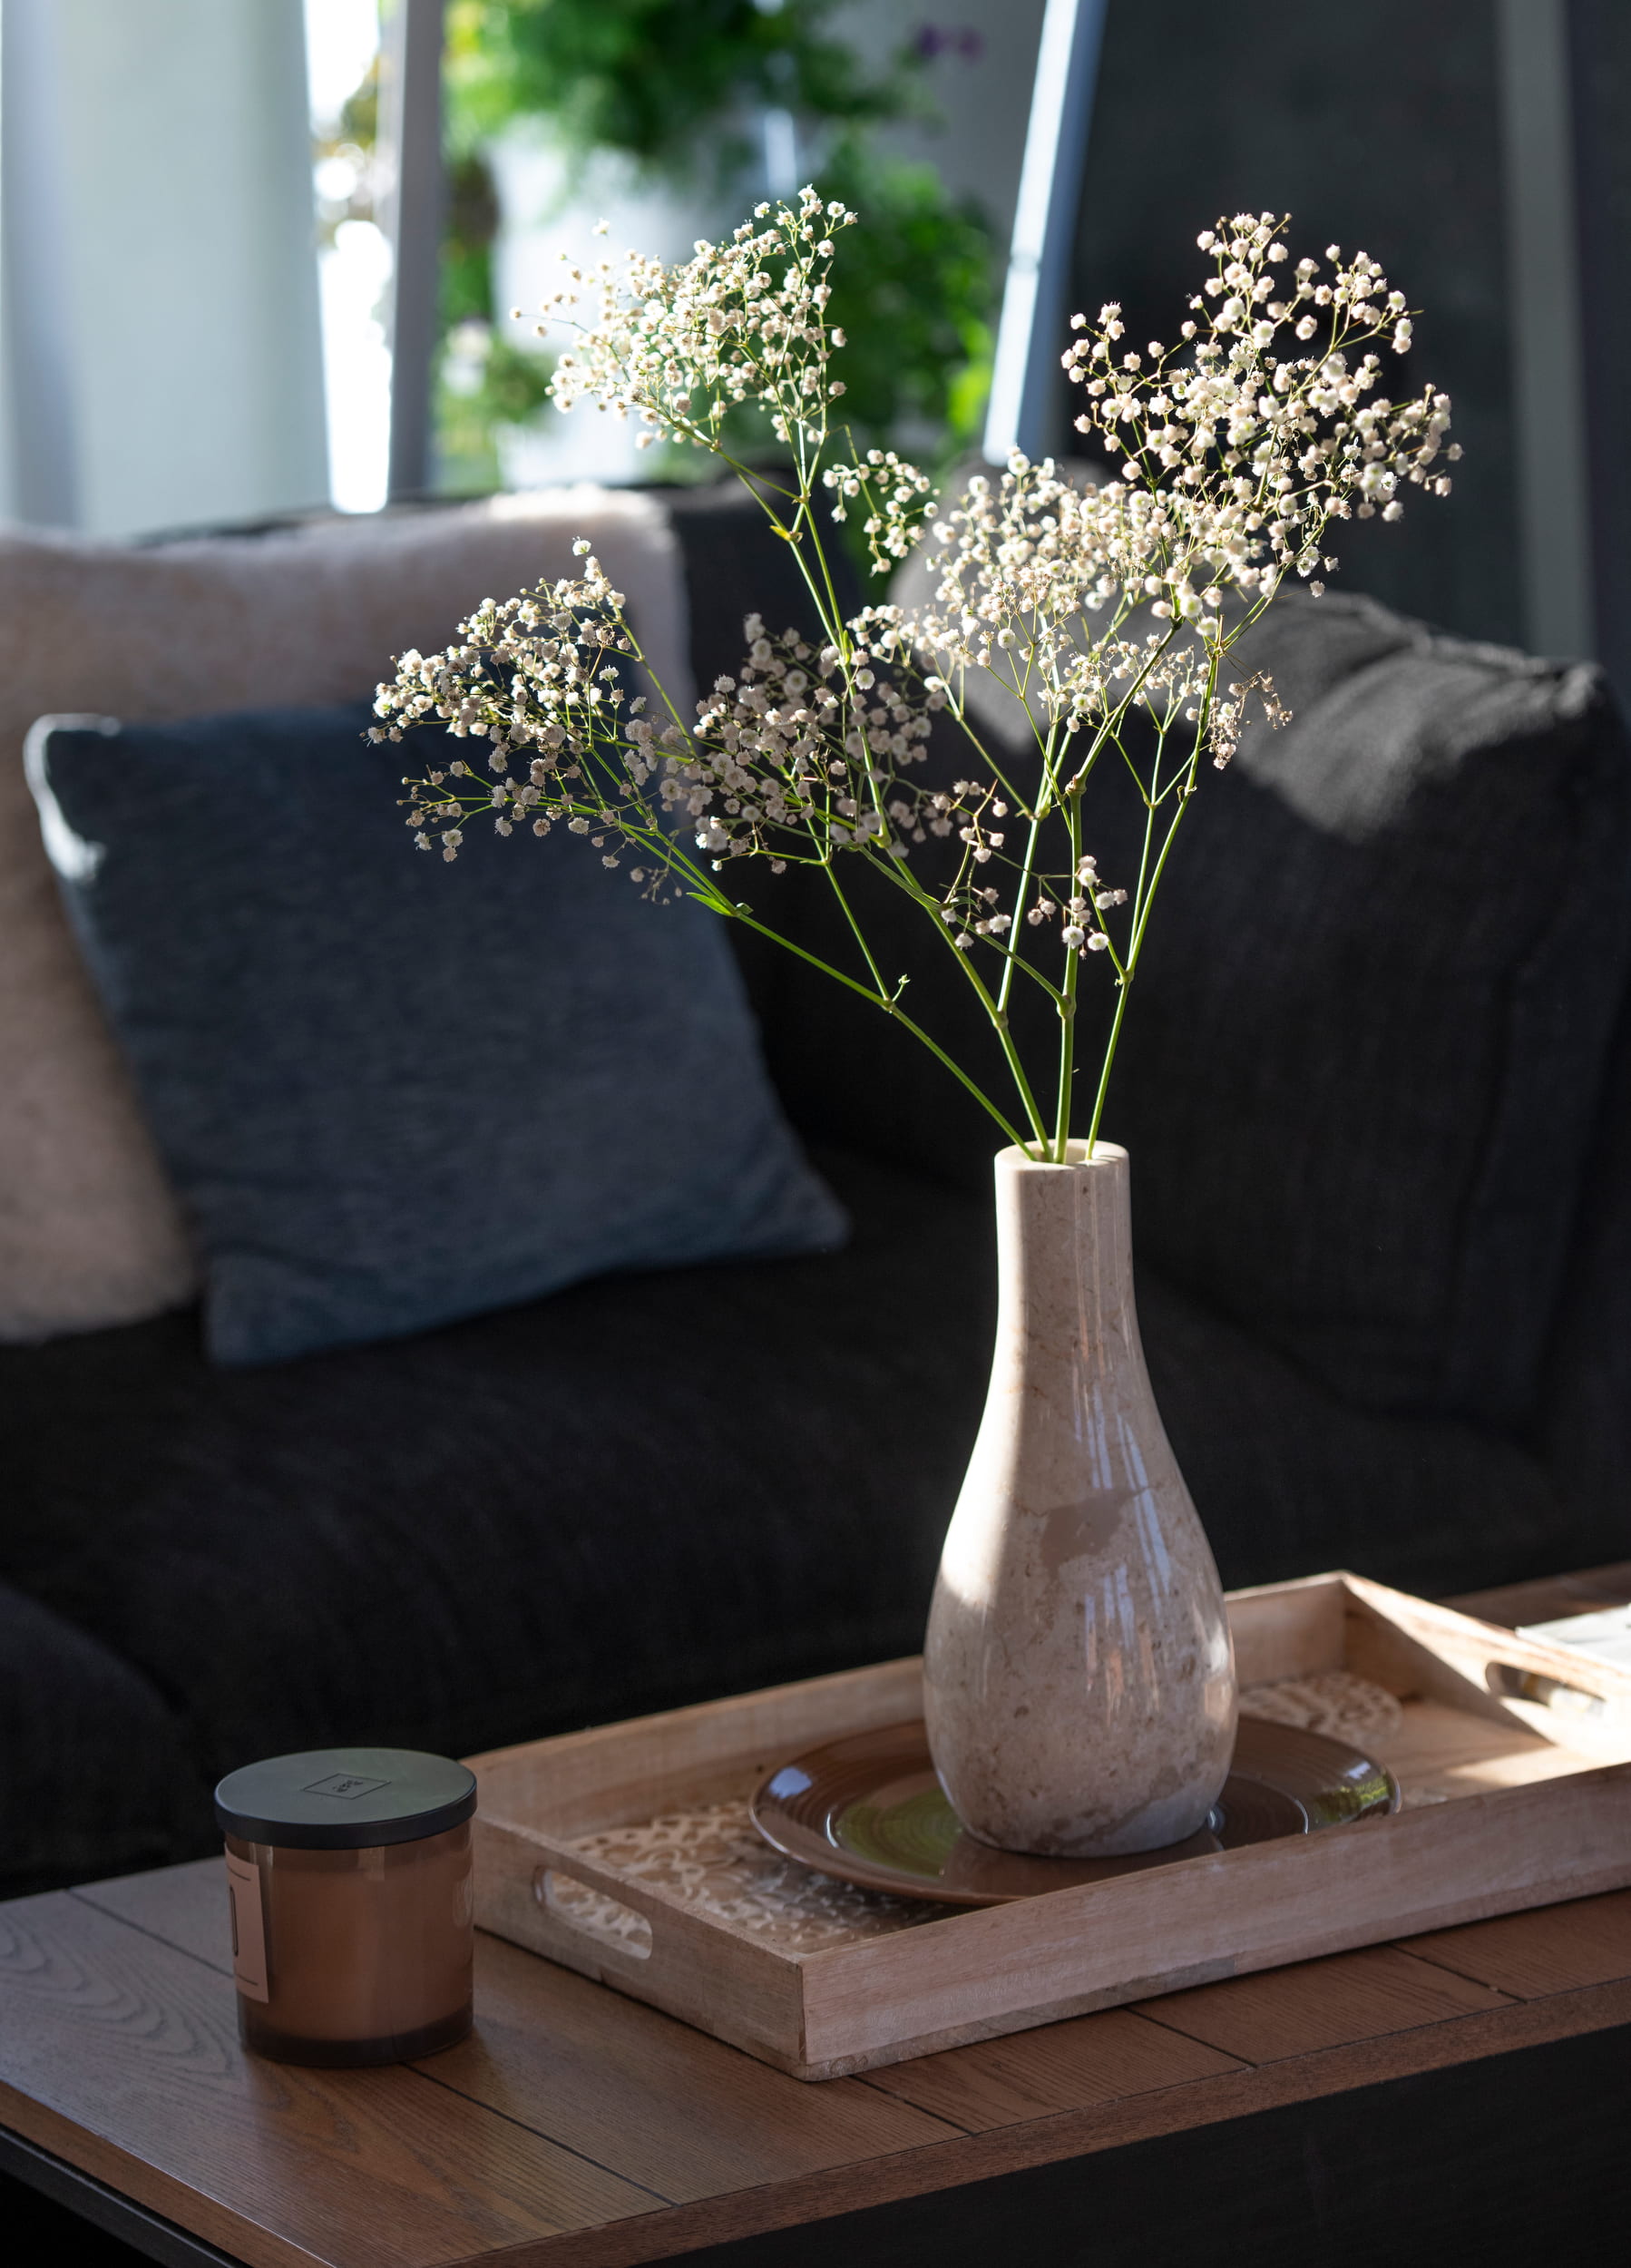 A decorative vase with baby's breath flowers on a coffee table in front of a sofa.